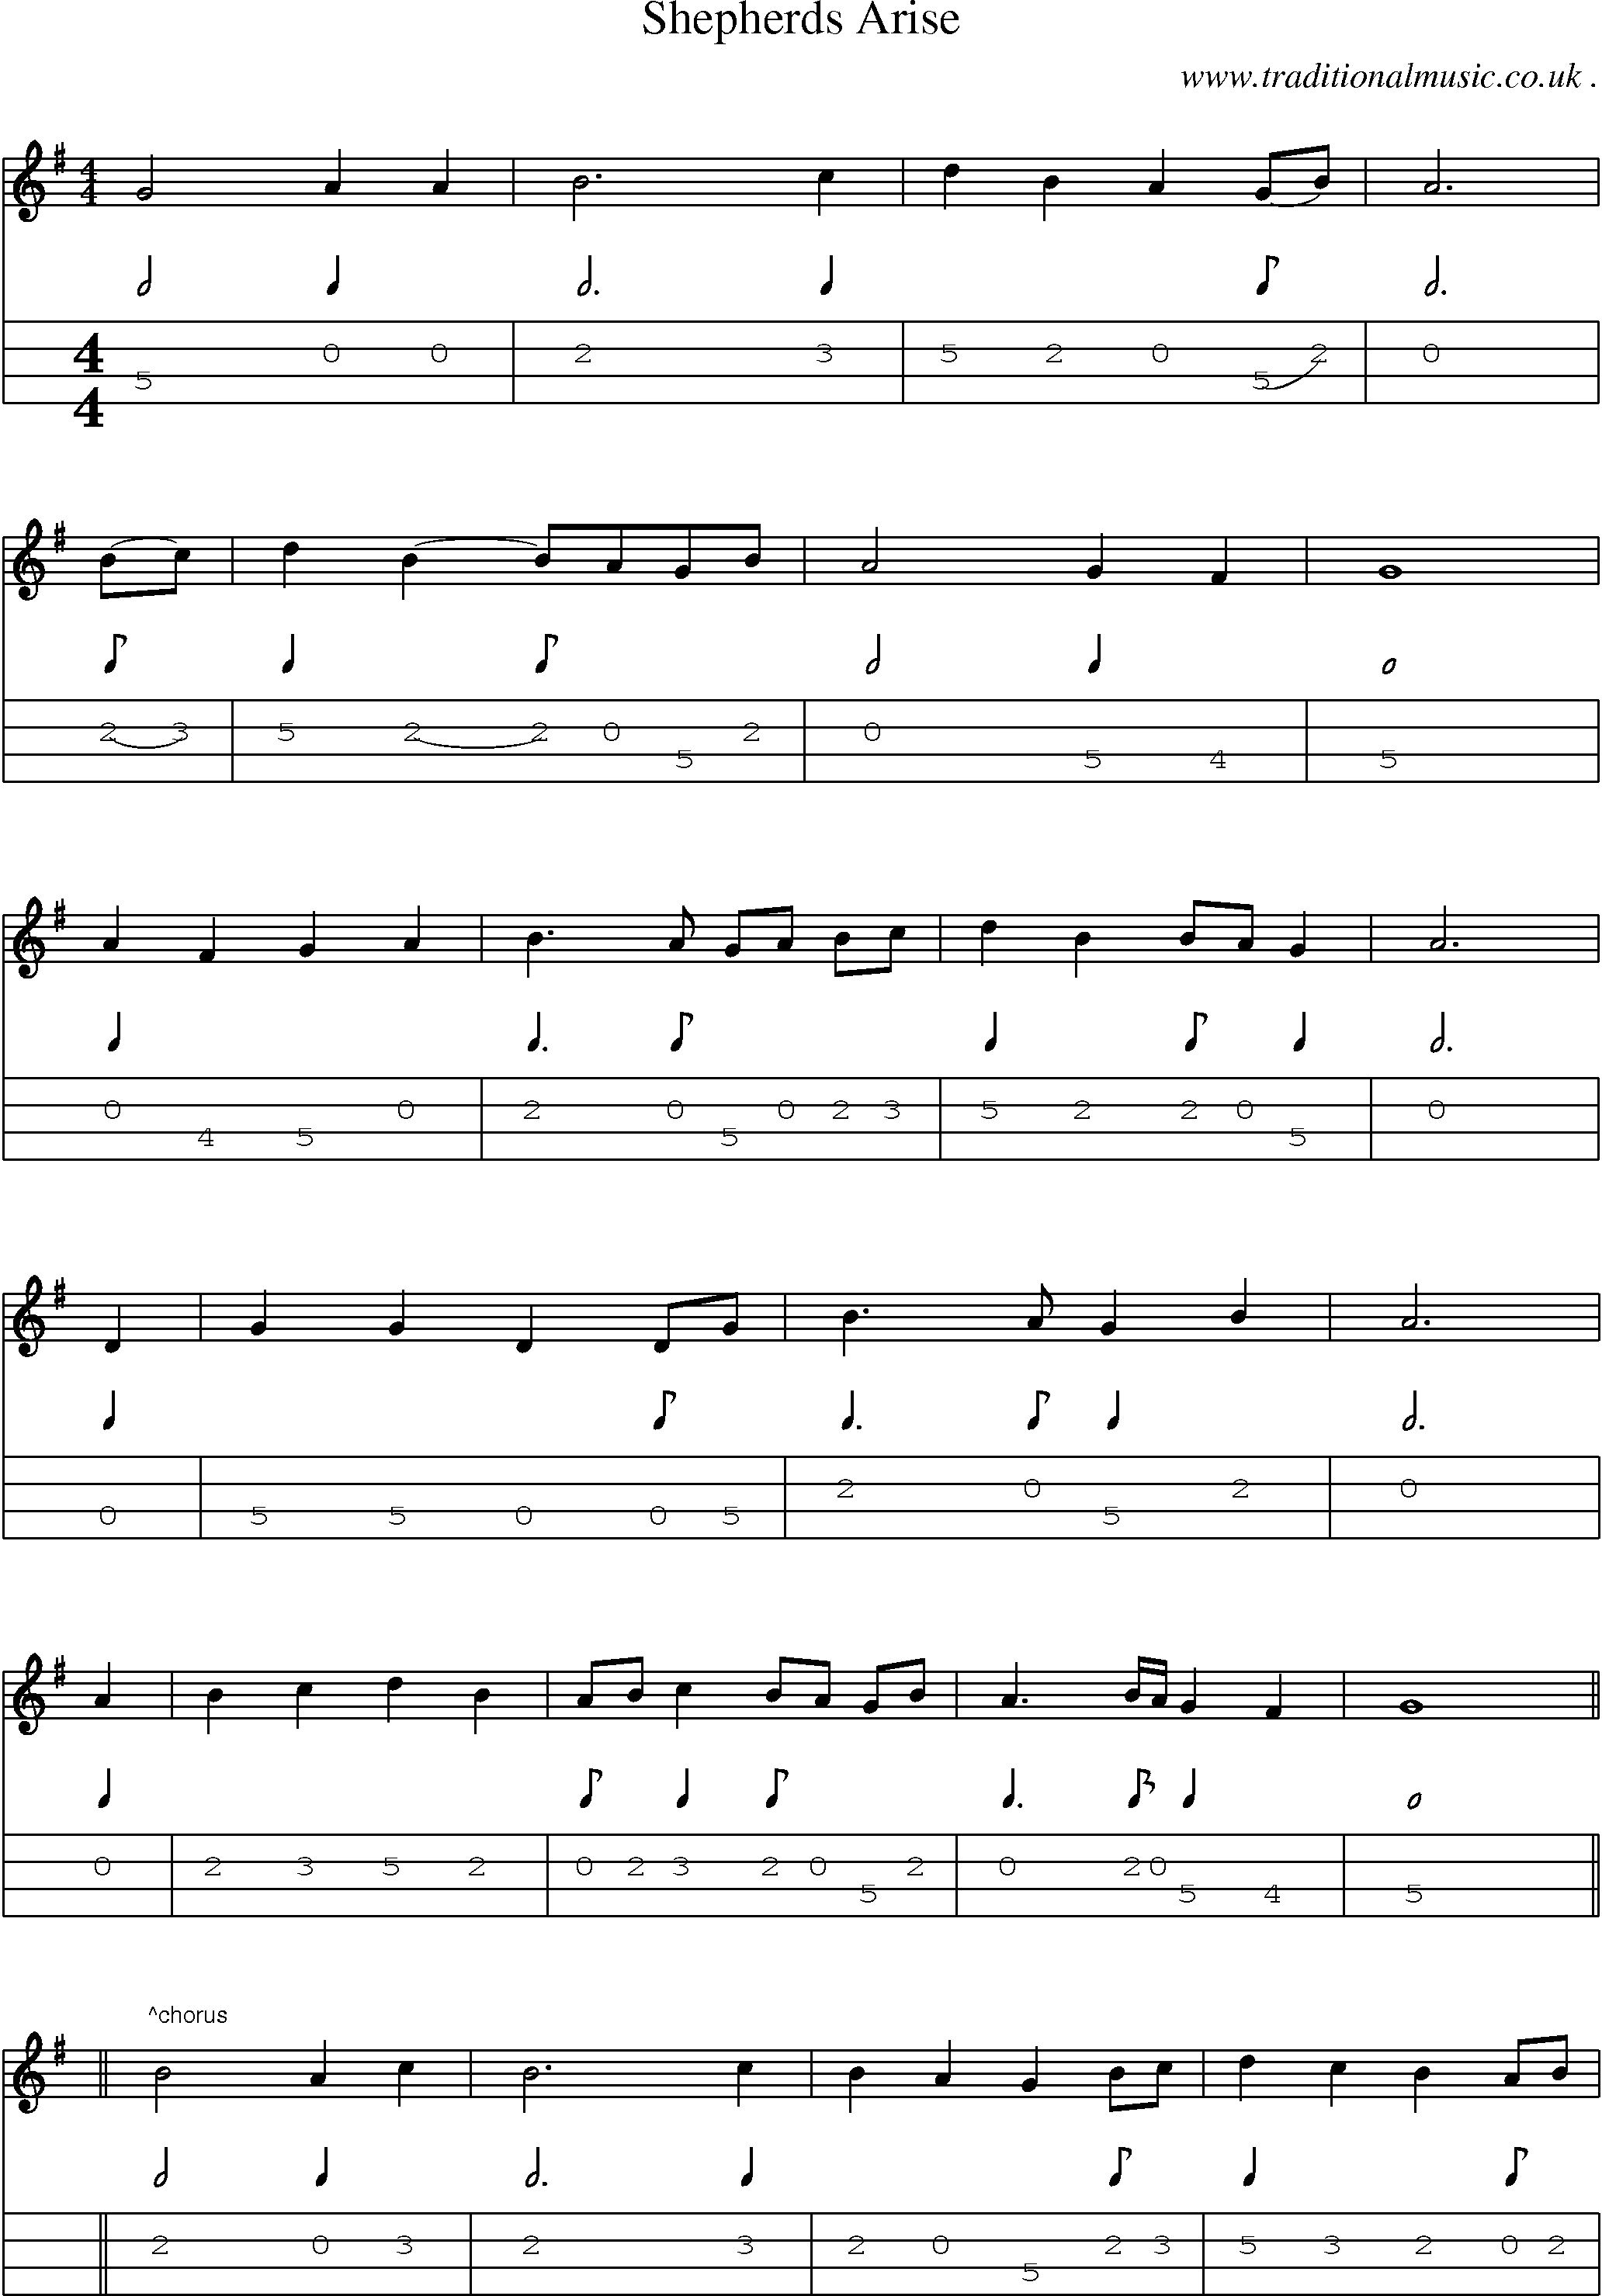 Sheet-Music and Mandolin Tabs for Shepherds Arise